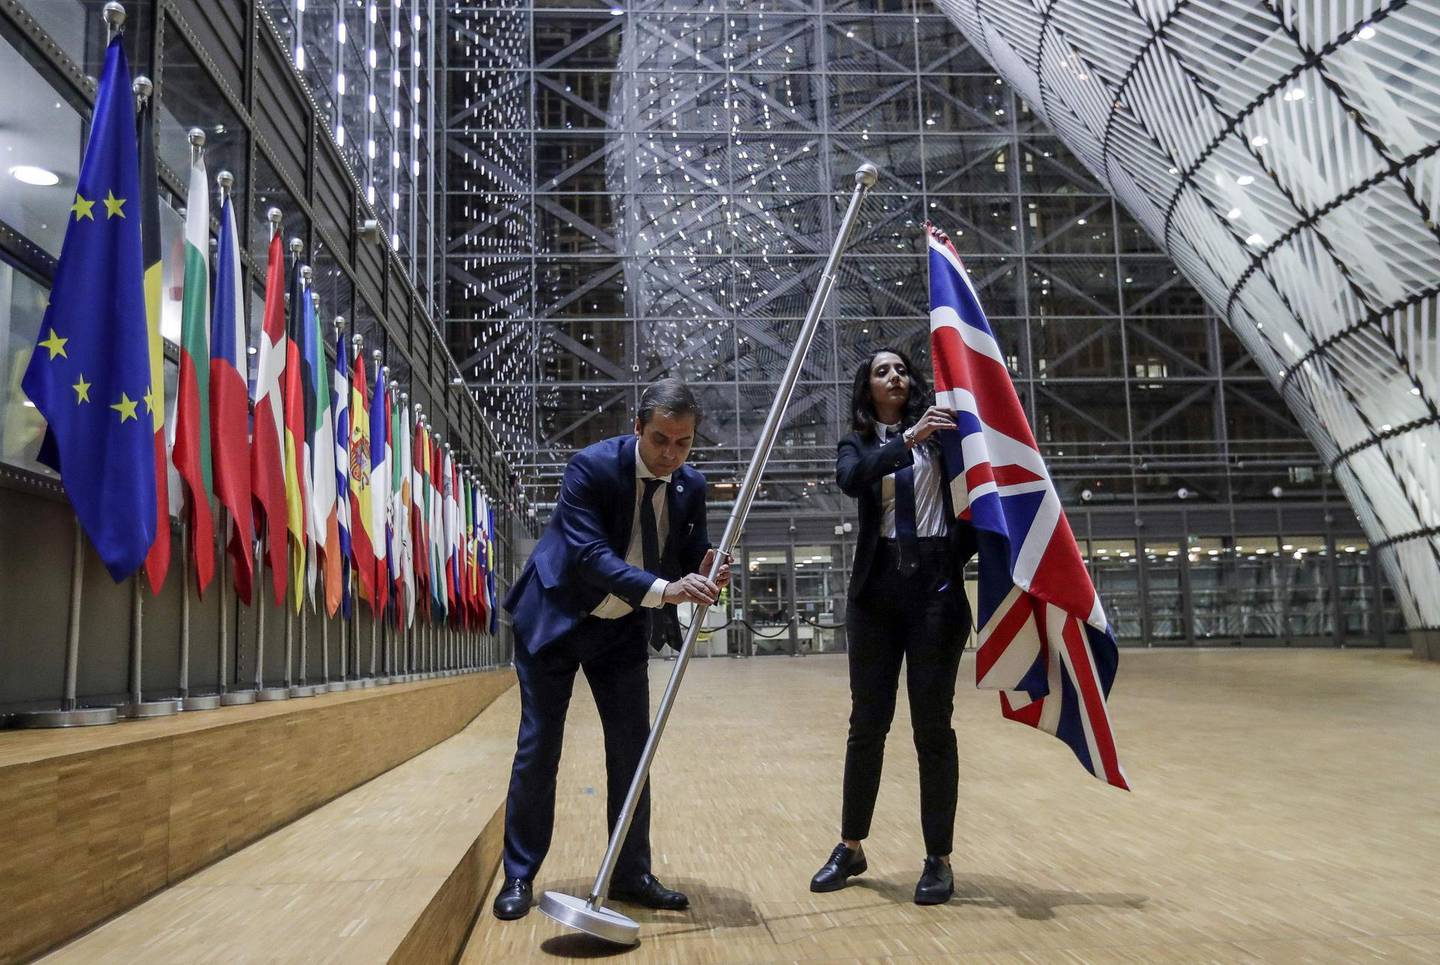 TOPSHOT - EU Council staff members remove the United Kingdom's flag from the European Council building in Brussels on Brexit Day, January 31, 2020. Britain leaves the European Union at 2300 GMT on January 31, 2020, 43 months after the country voted in a June 2016 referendum to leave the block. The withdrawal from the union ends more than four decades of economic, political and legal integration with its closest neighbours. / AFP / POOL / OLIVIER HOSLET
